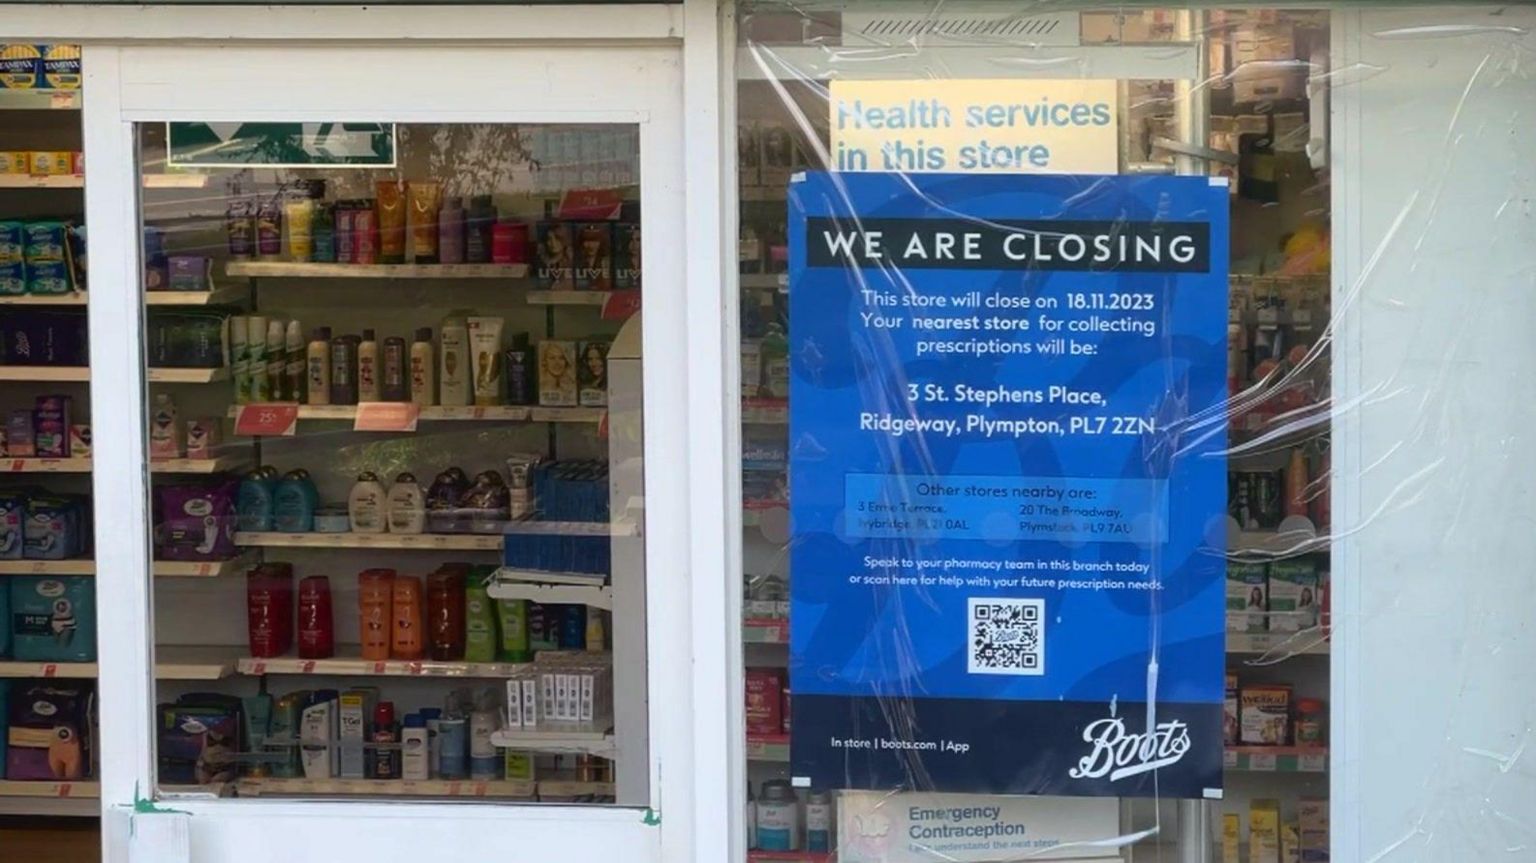 Closure of Boots stores in Devon will be 'a disaster' BBC News